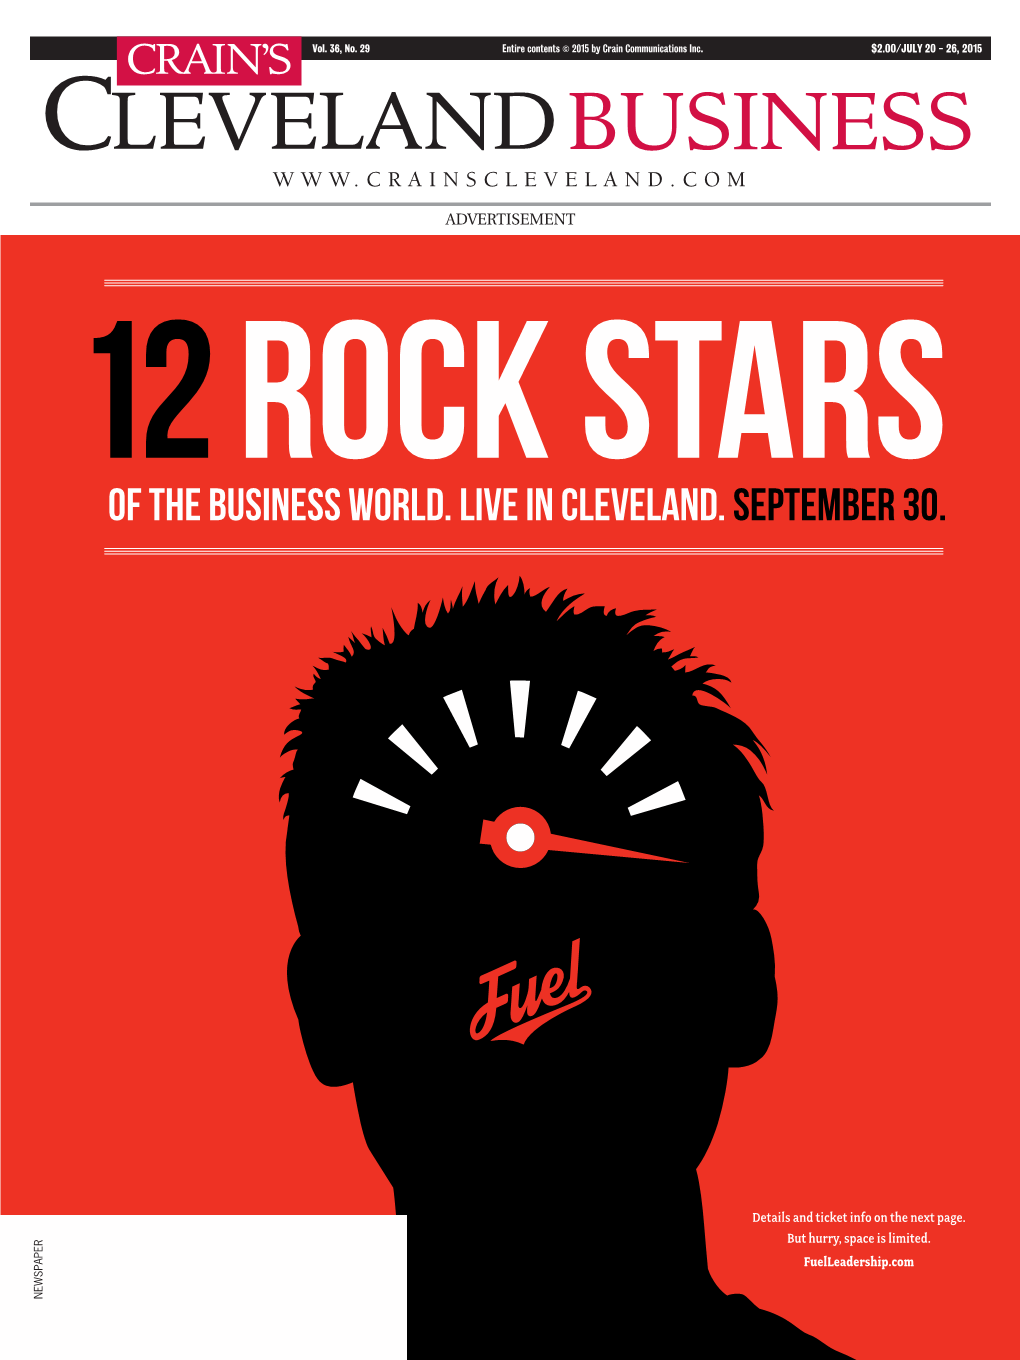 Of the Business World. Live in Cleveland. September 30